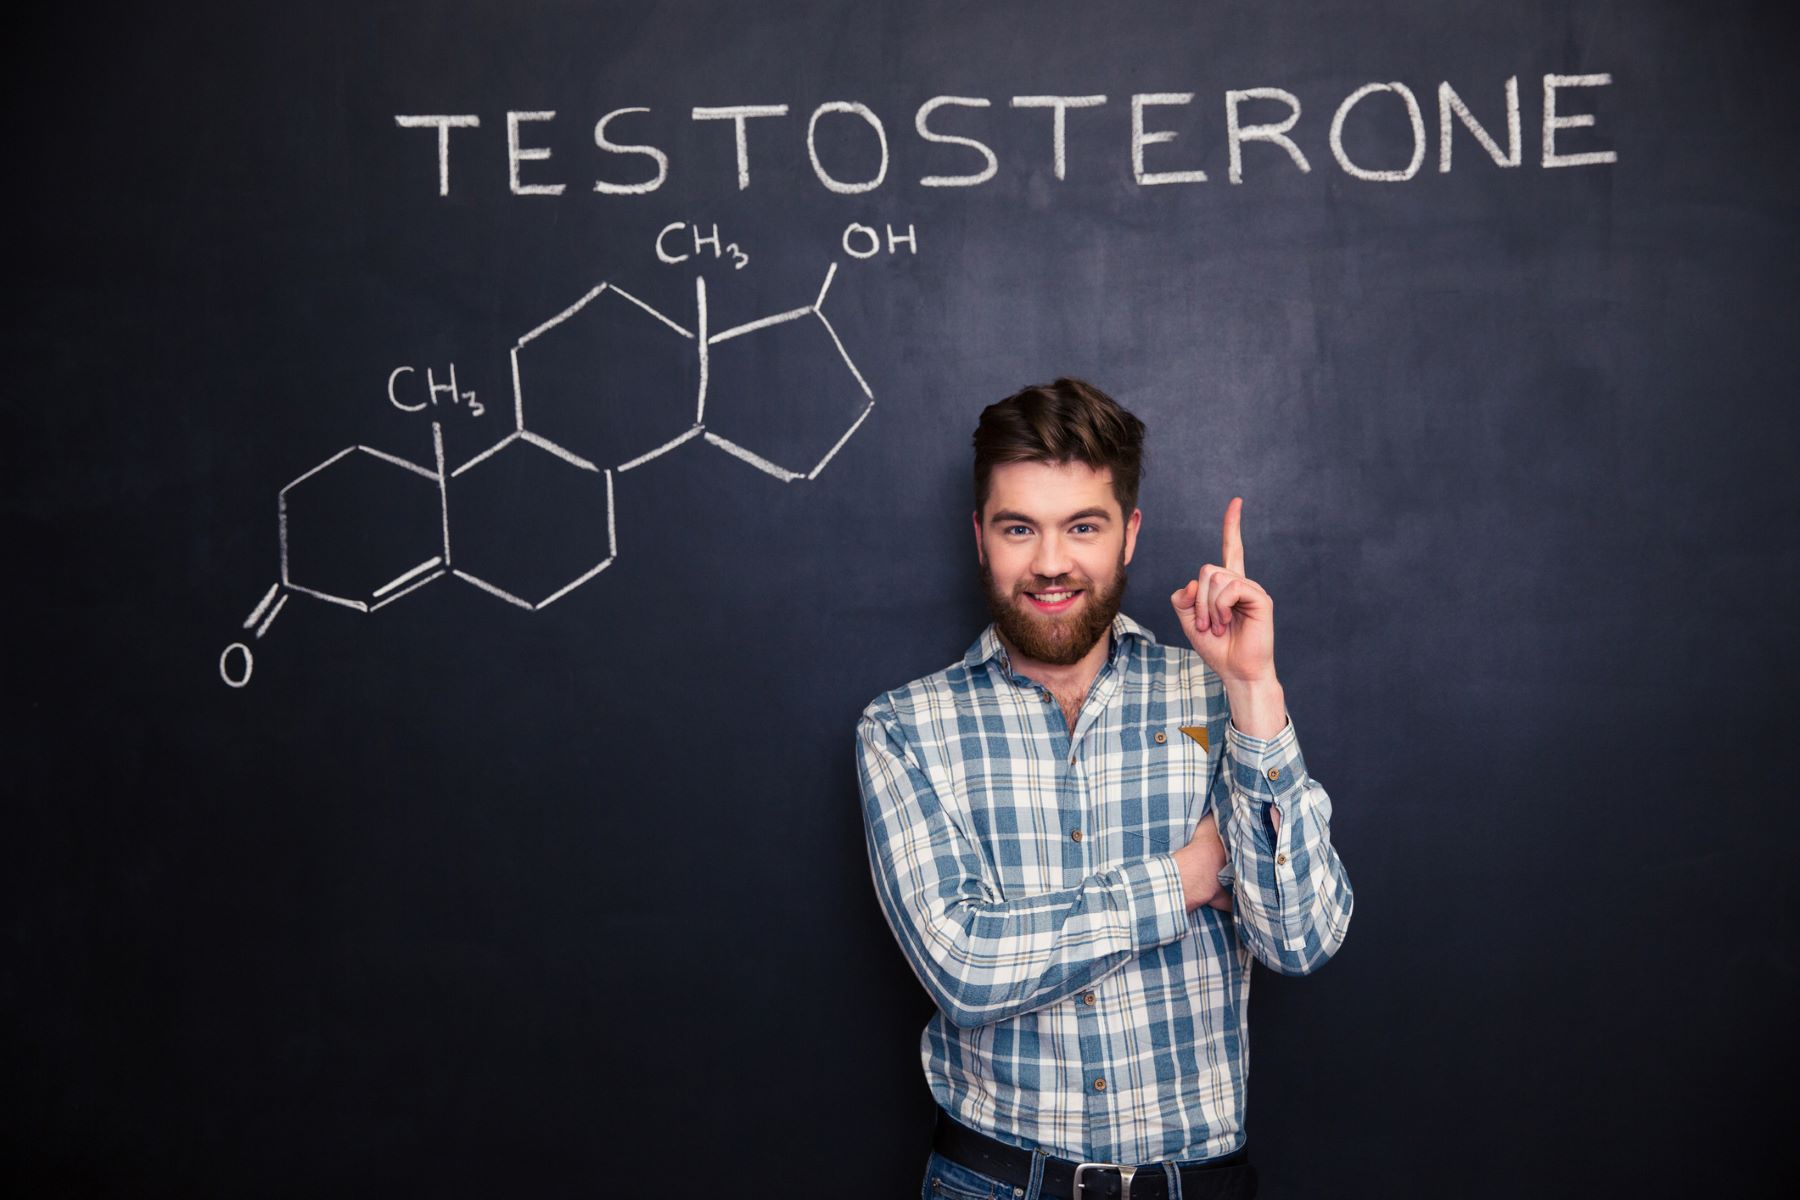 A young man standing in front of a blackboard, pointing at the word “testosterone” written on it above his head.